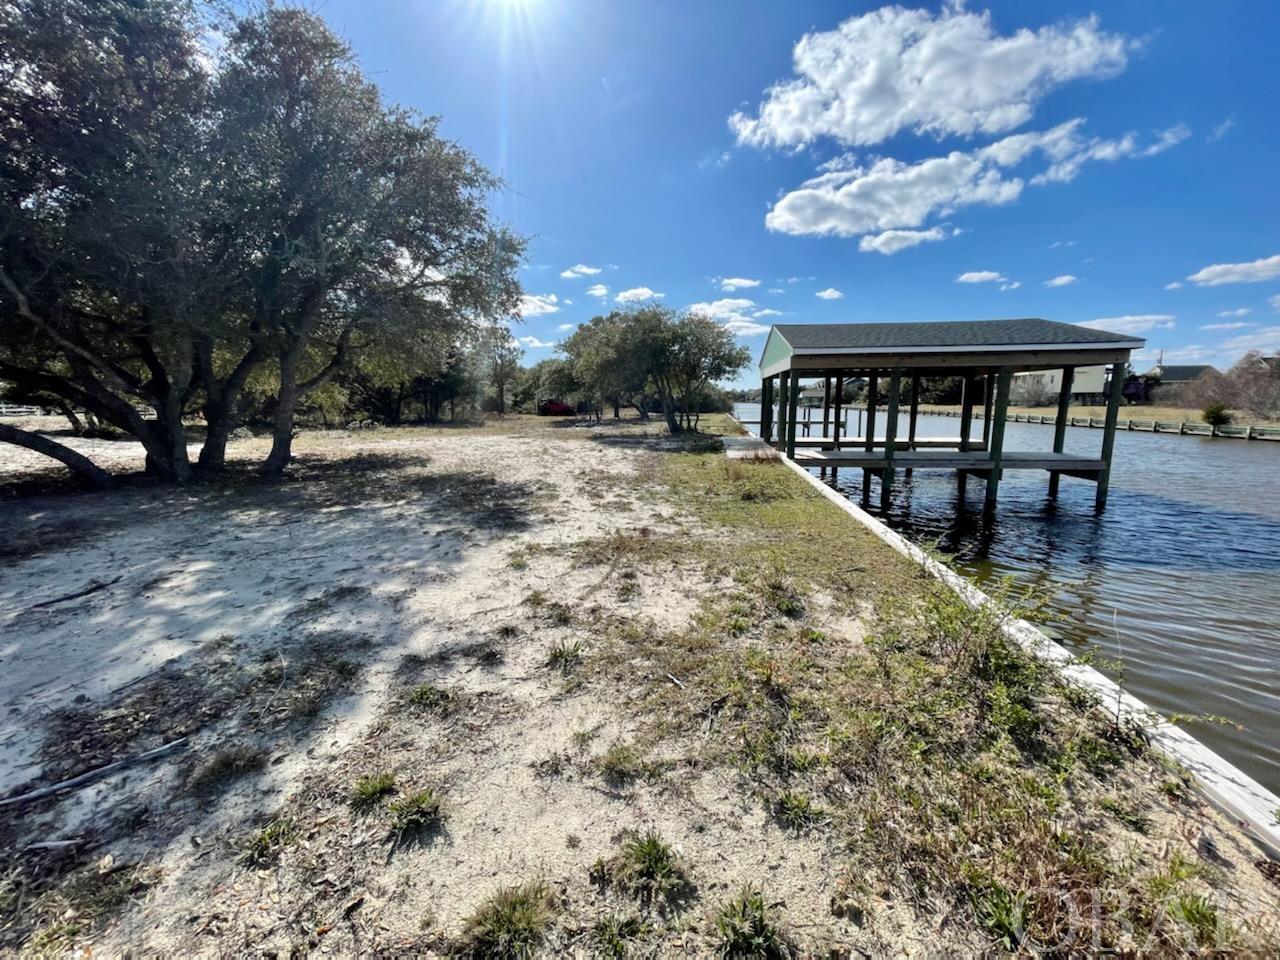 Beautiful ready-to-build canal front lot is located on Carova Beach. Ideal Location across the street from Carova Boat Ramp and Beach Park. This is a perfect location for your newly- constructed permanent, investment or vacation home! Watch the wild horses along this quiet beach, relax and enjoy the OBX.  Newly bulk headed with a boat house that encompasses 3 boat parking and two 6' x 24' piers on a recently dredged canal. Brand new septic and well installed. House pad is ready. 100 amp electric pole installed. Stick-built shed.